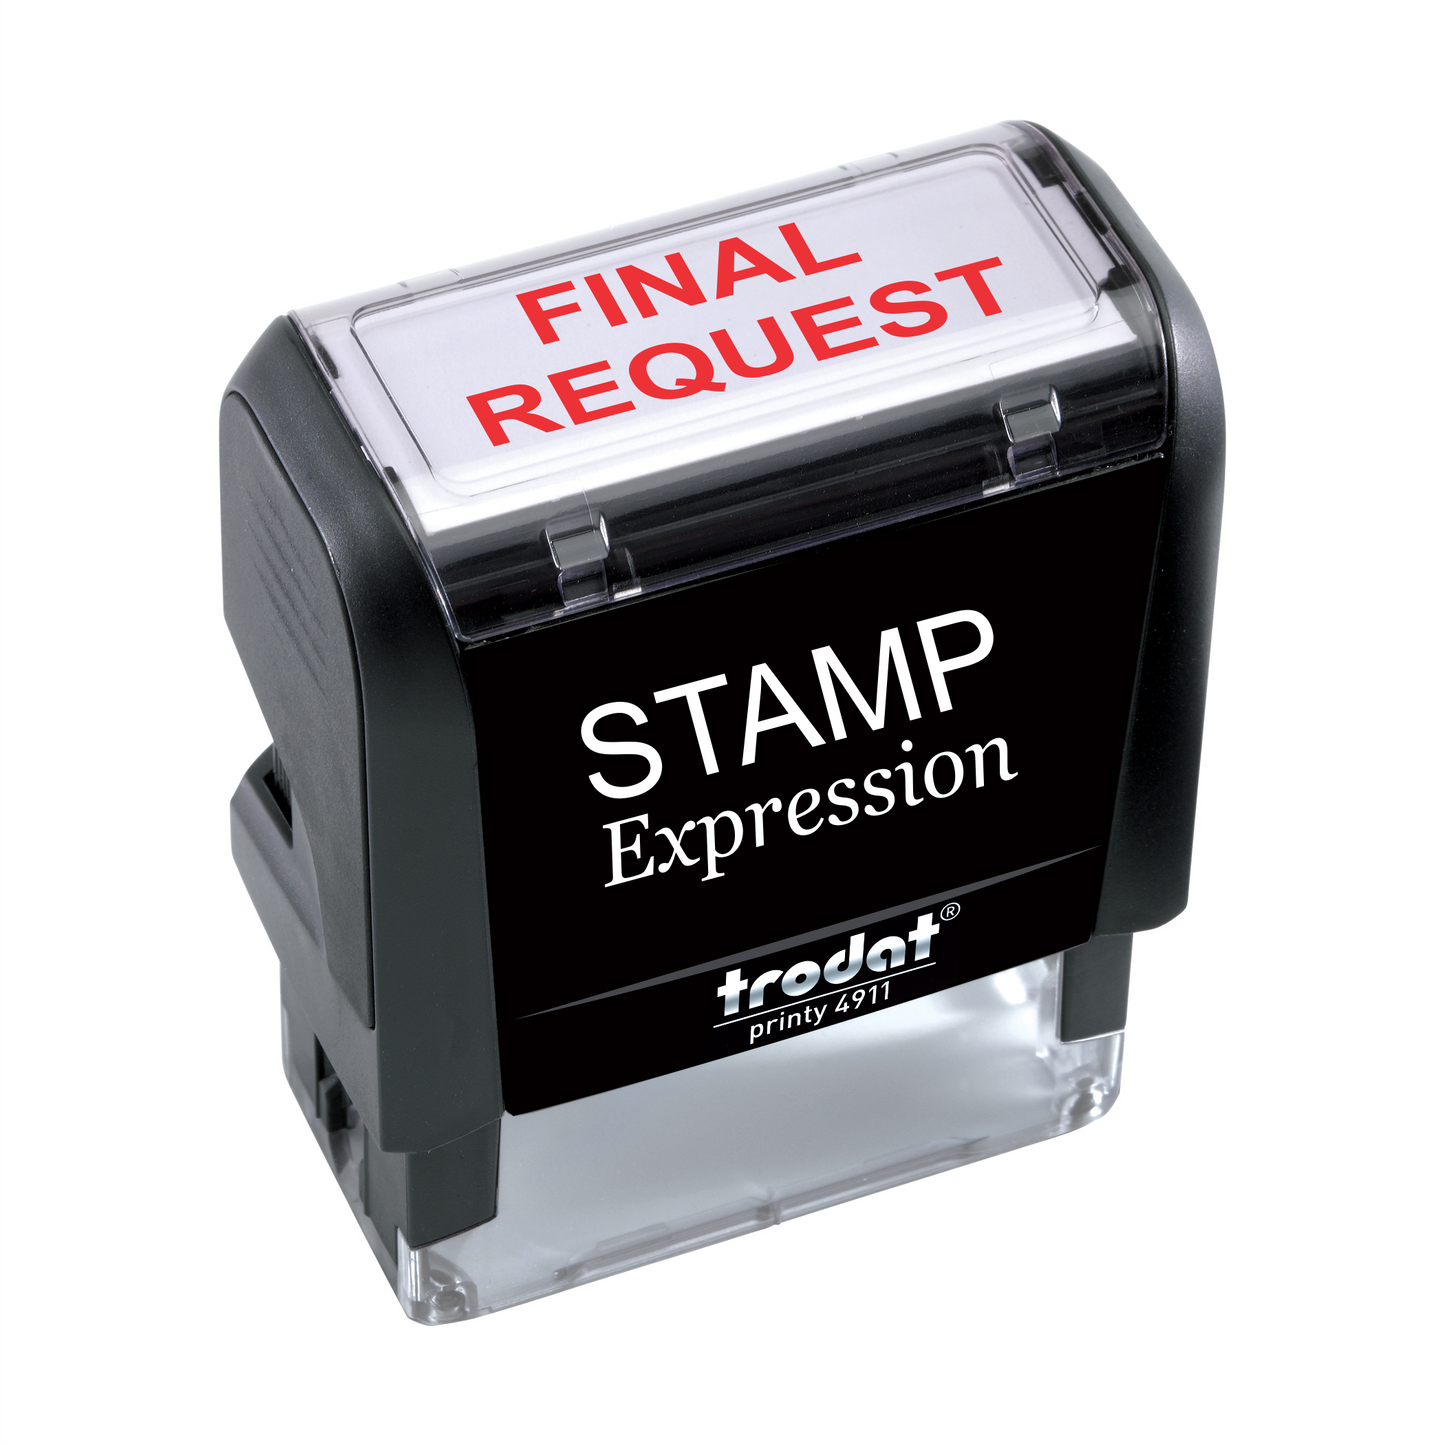 Final Request Office Self Inking Rubber Stamp (SH-5299)